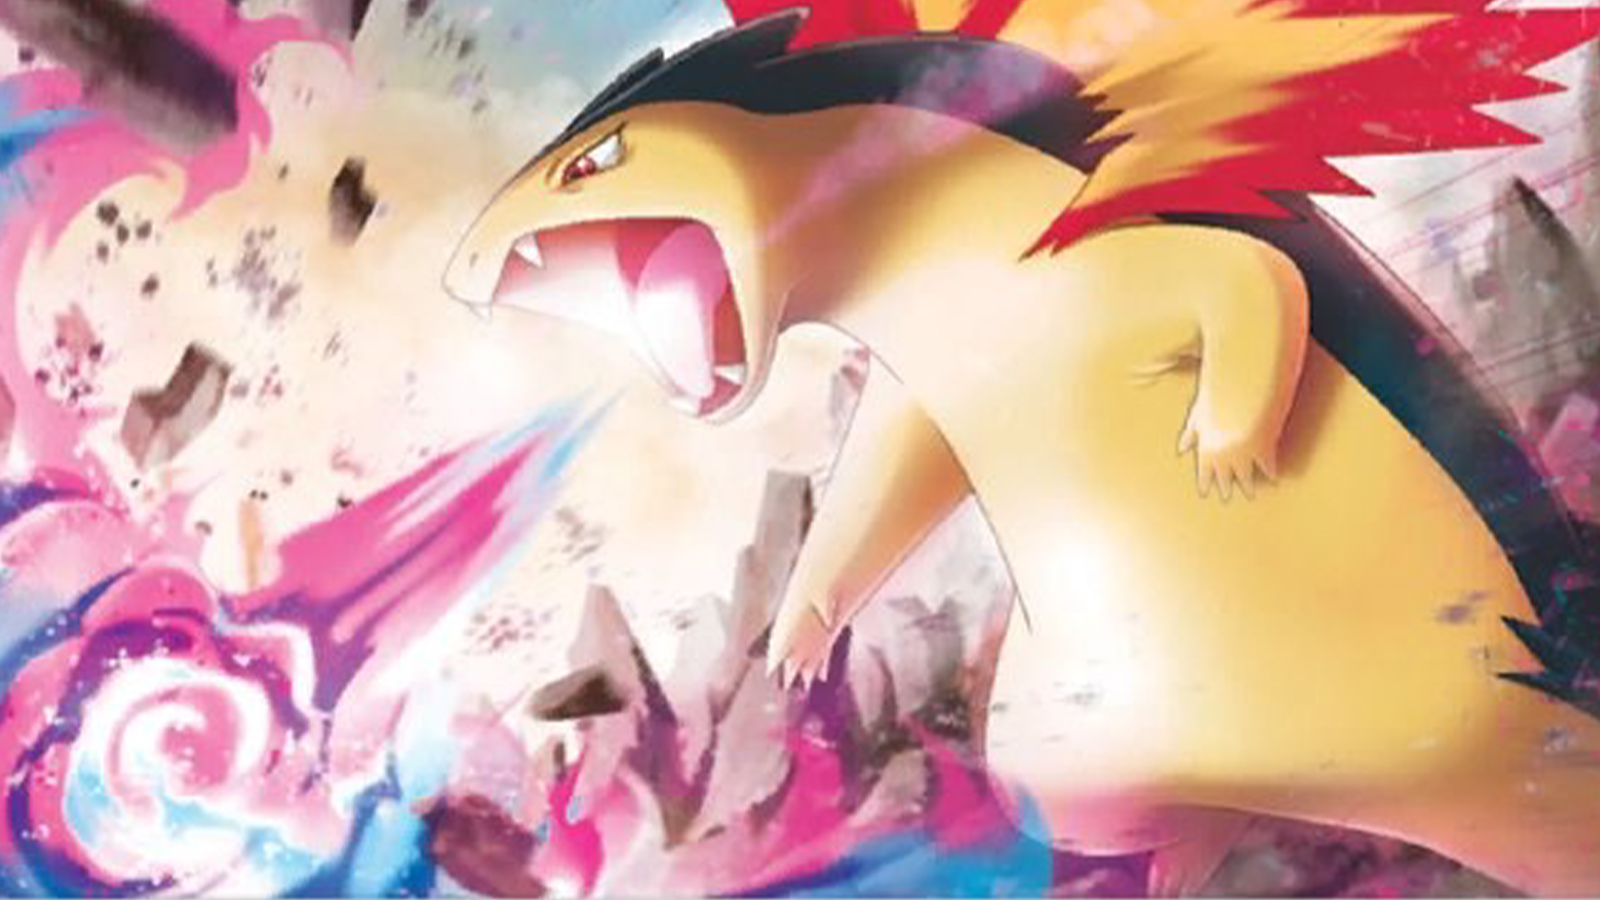 Download Typhlosion Pokemon wallpapers for mobile phone free  Typhlosion Pokemon HD pictures